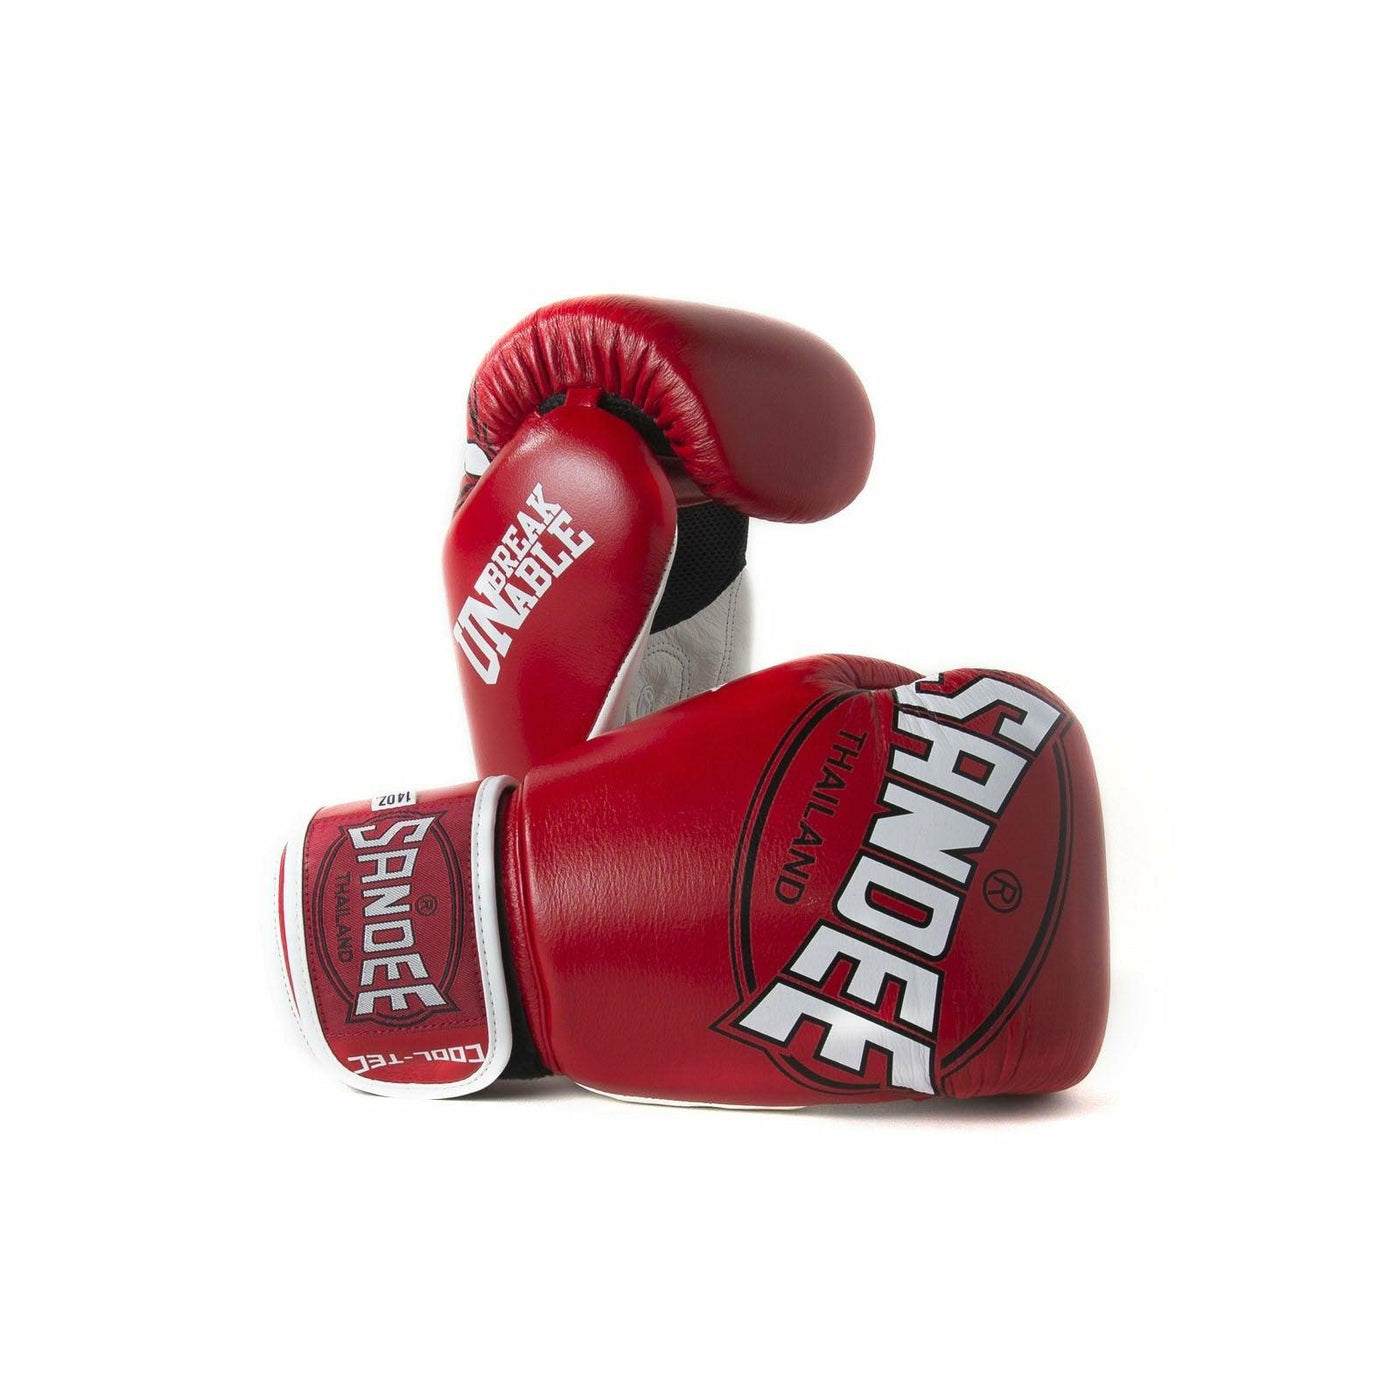 Sandee Cool-Tec Gloves - Red/White/Black - Muay Thailand